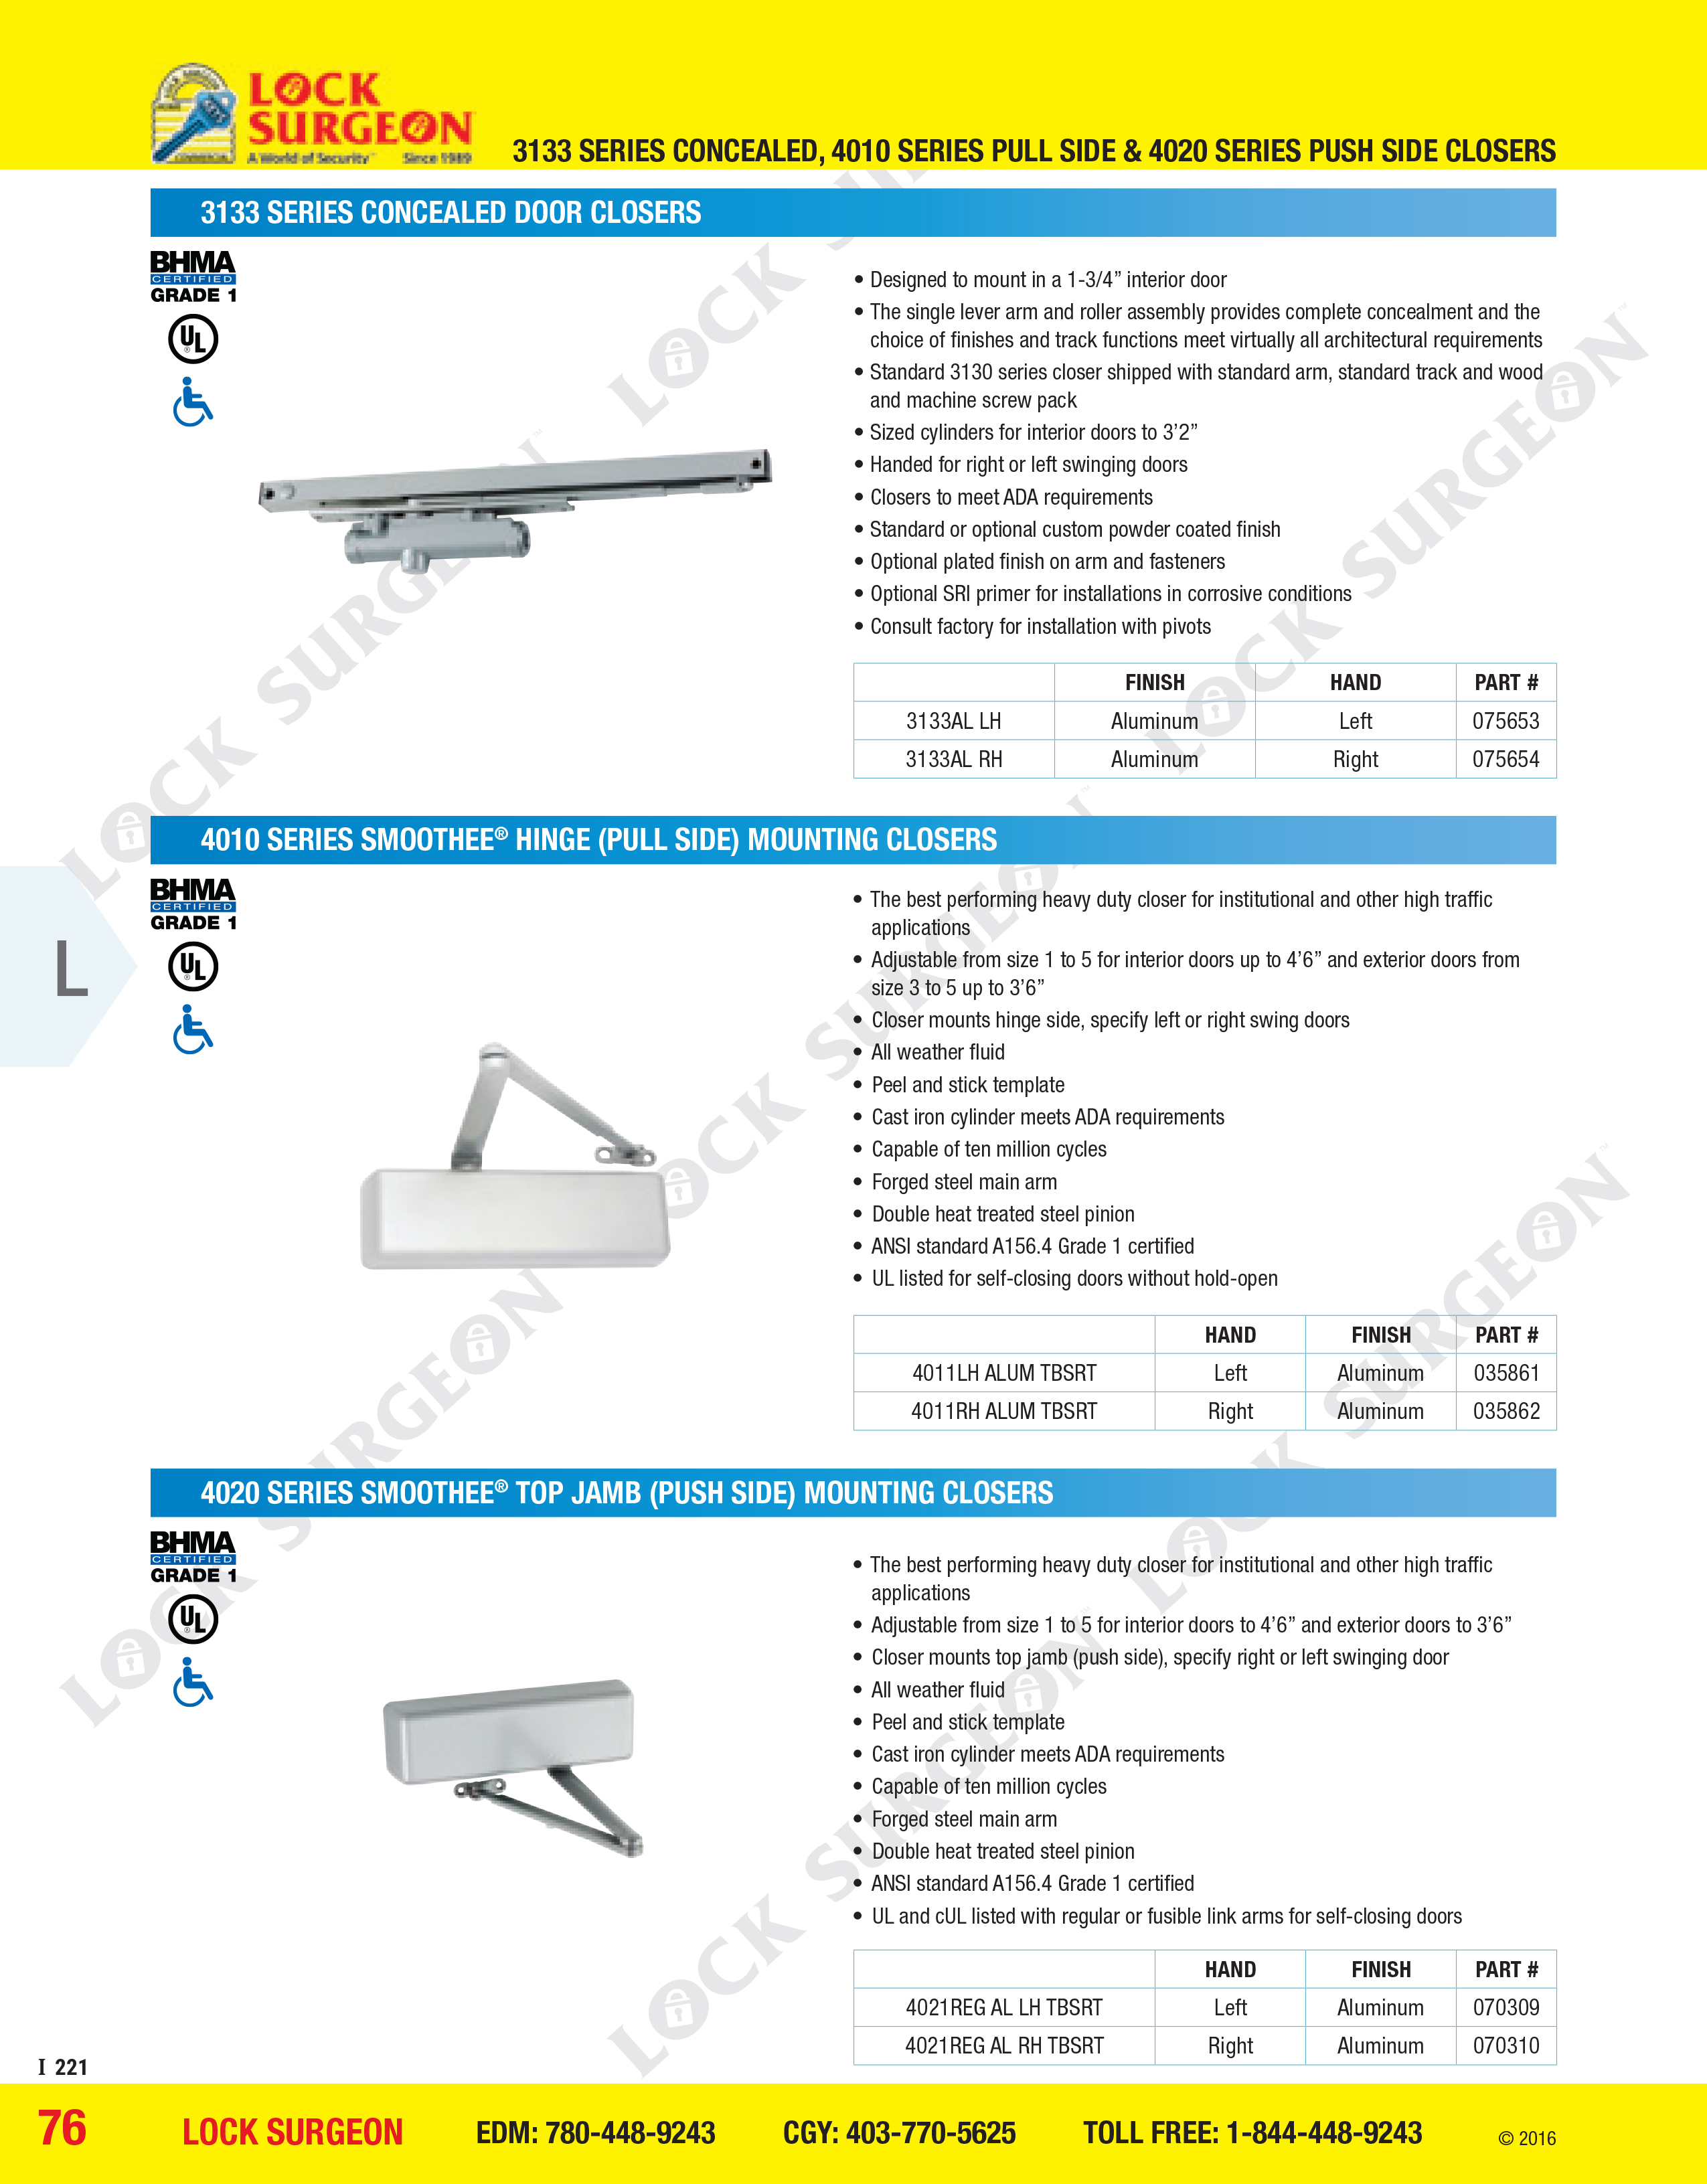 LCN 3133 series concealed door closers, 4010 series hinge closers and 4020 series top jamb closers.